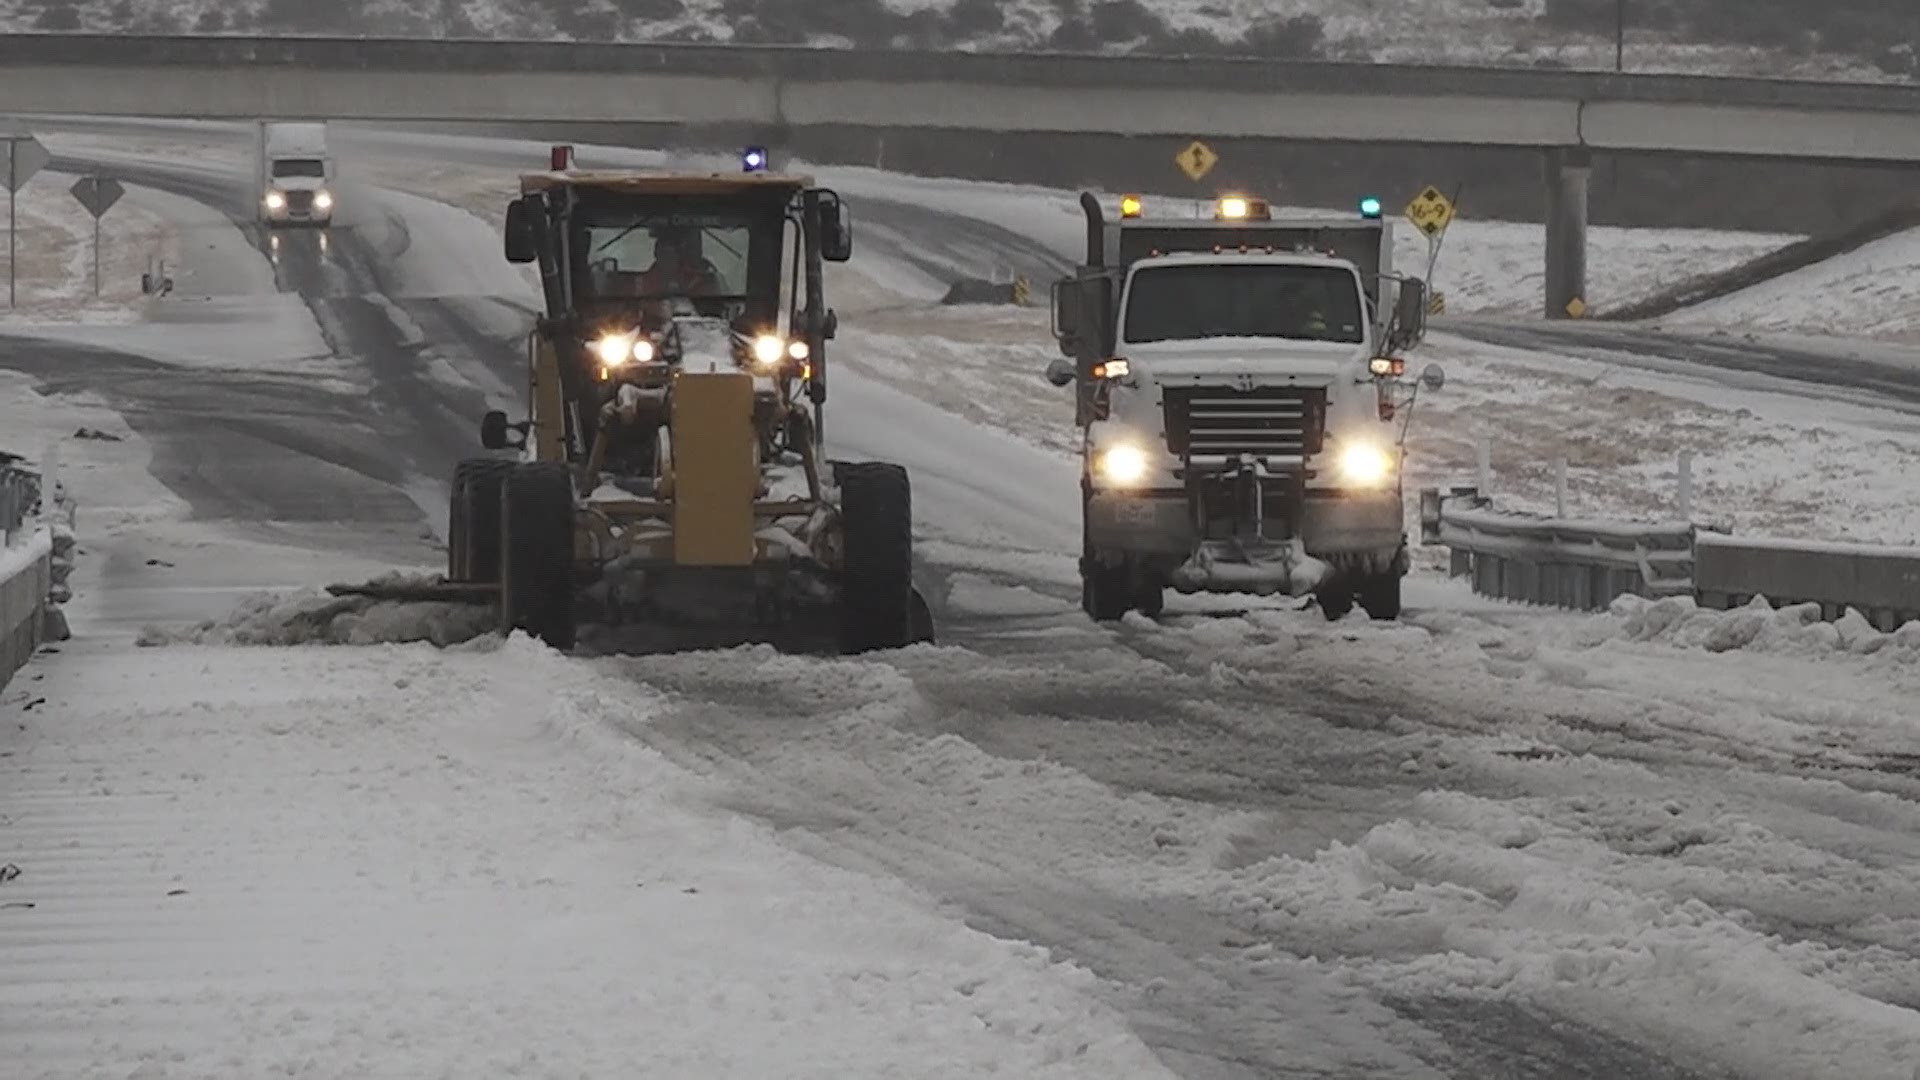 A large winter weather system was making roadways treacherous in West Texas on New Year's Eve.